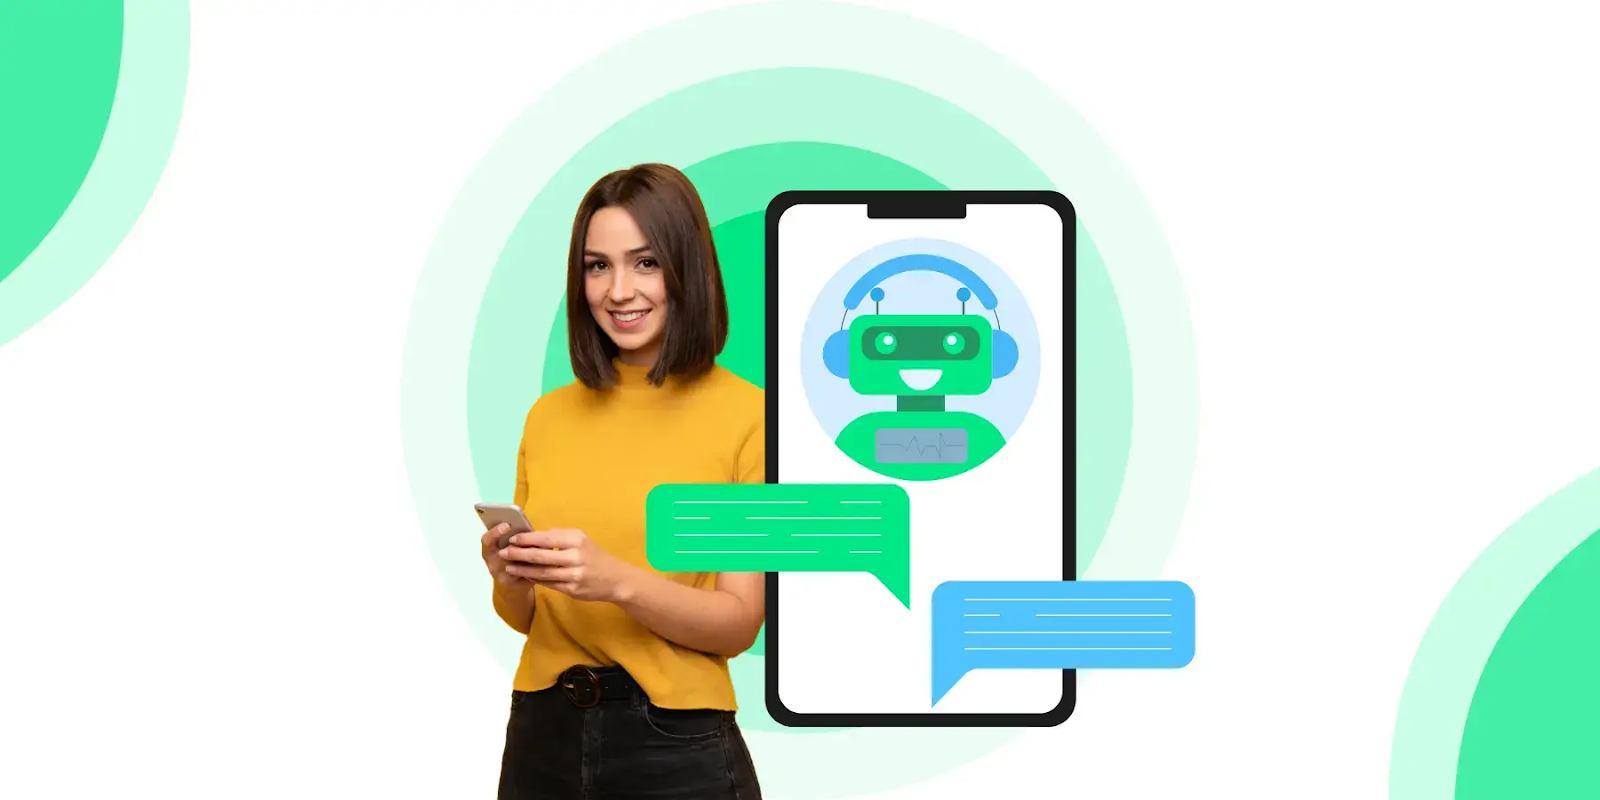 a human interacting with a chatbot over text